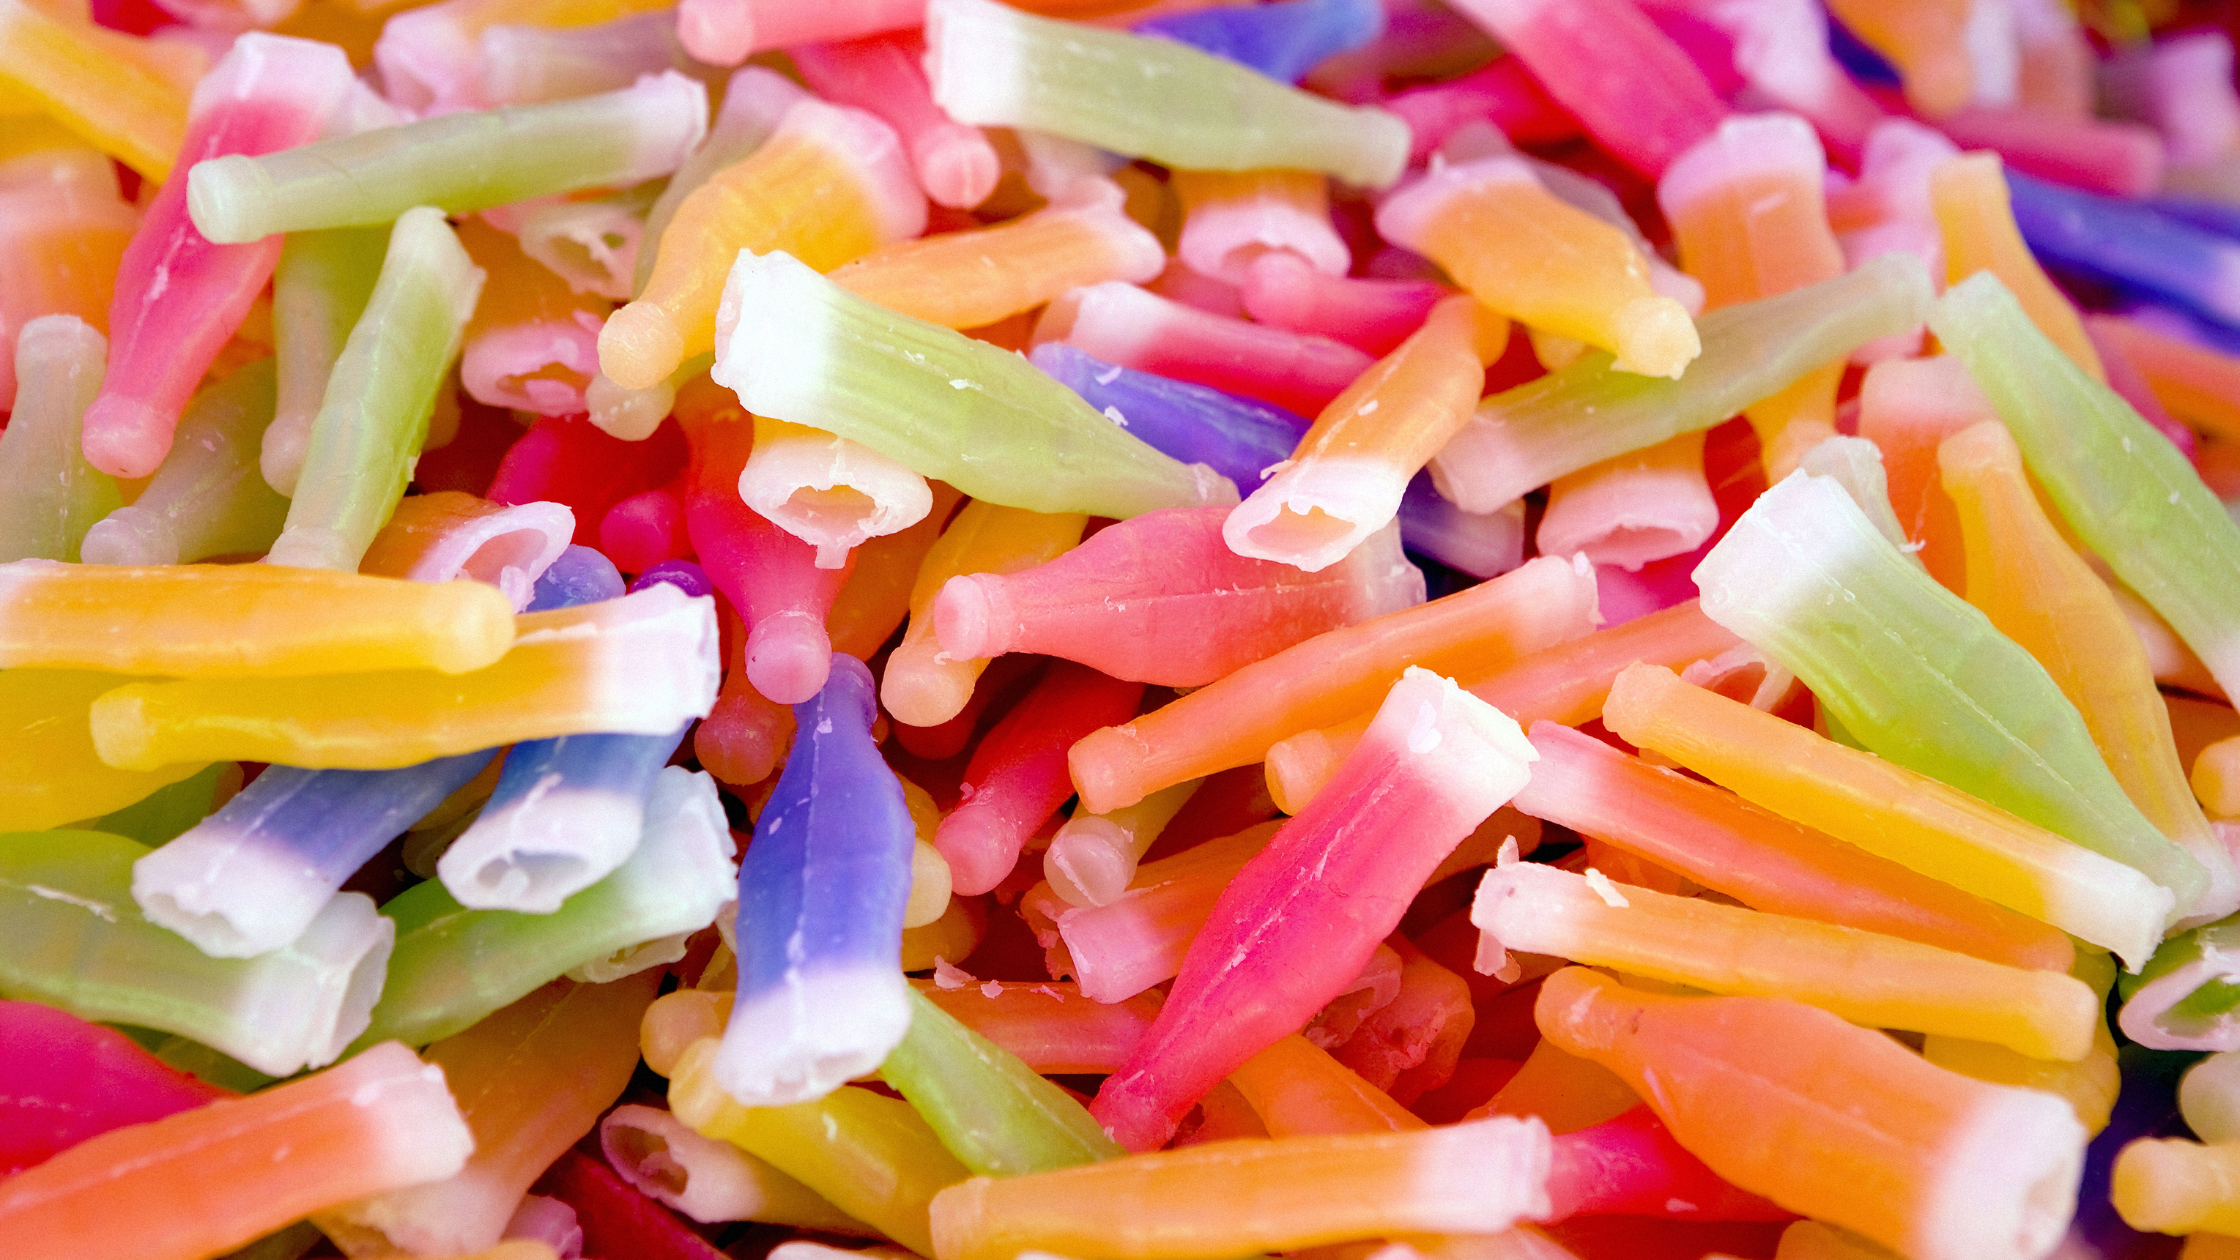 The Best Wax Candy Brands and Products Now Available In Bulk